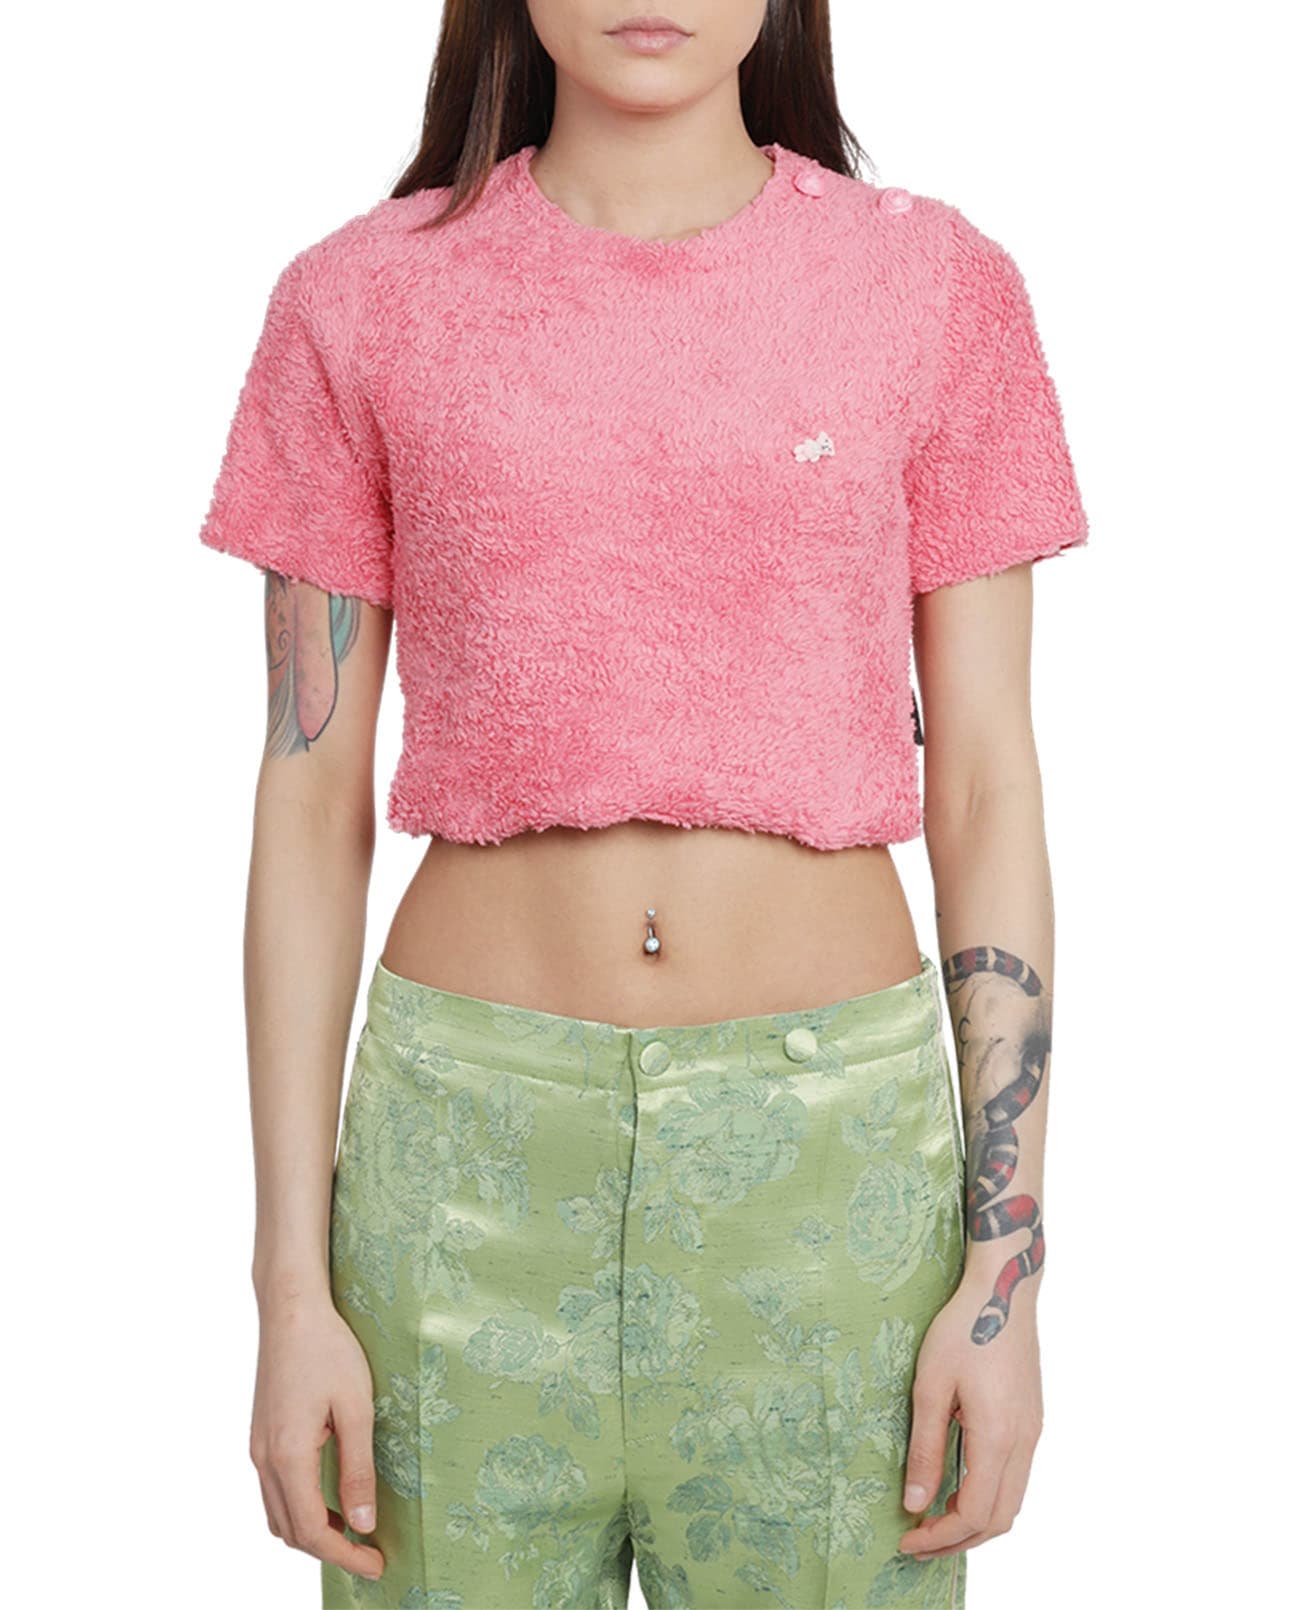 Cool TM Cool T.m Pink Cropped Top